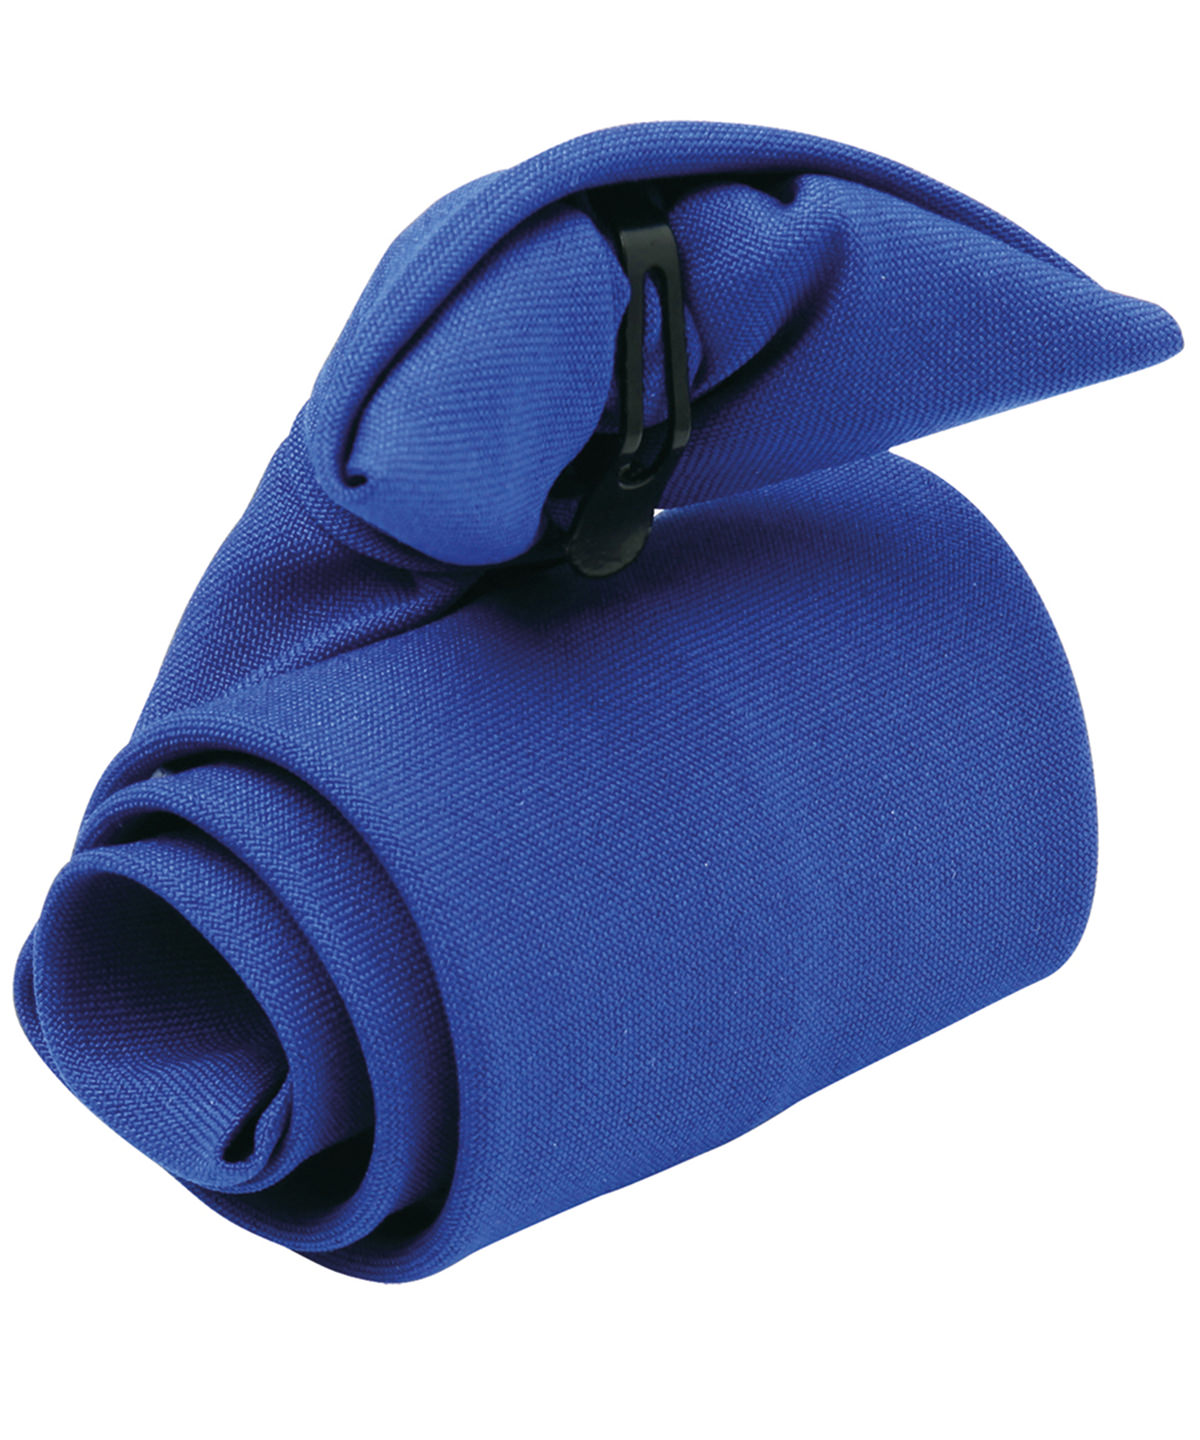 Clip Tie Royal Size One Size